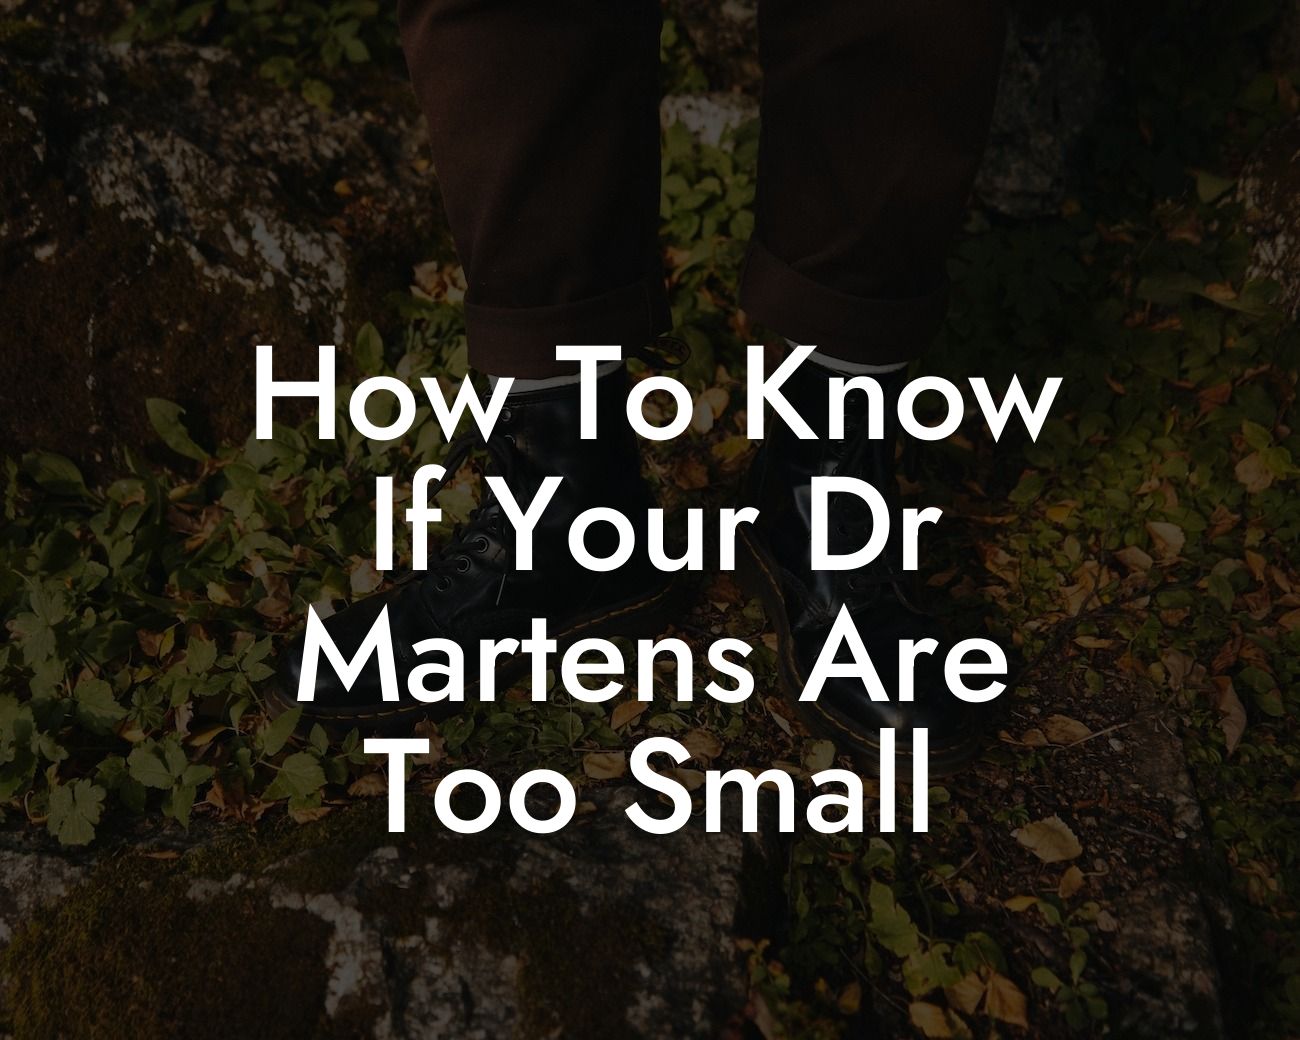 How To Know If Your Dr Martens Are Too Small